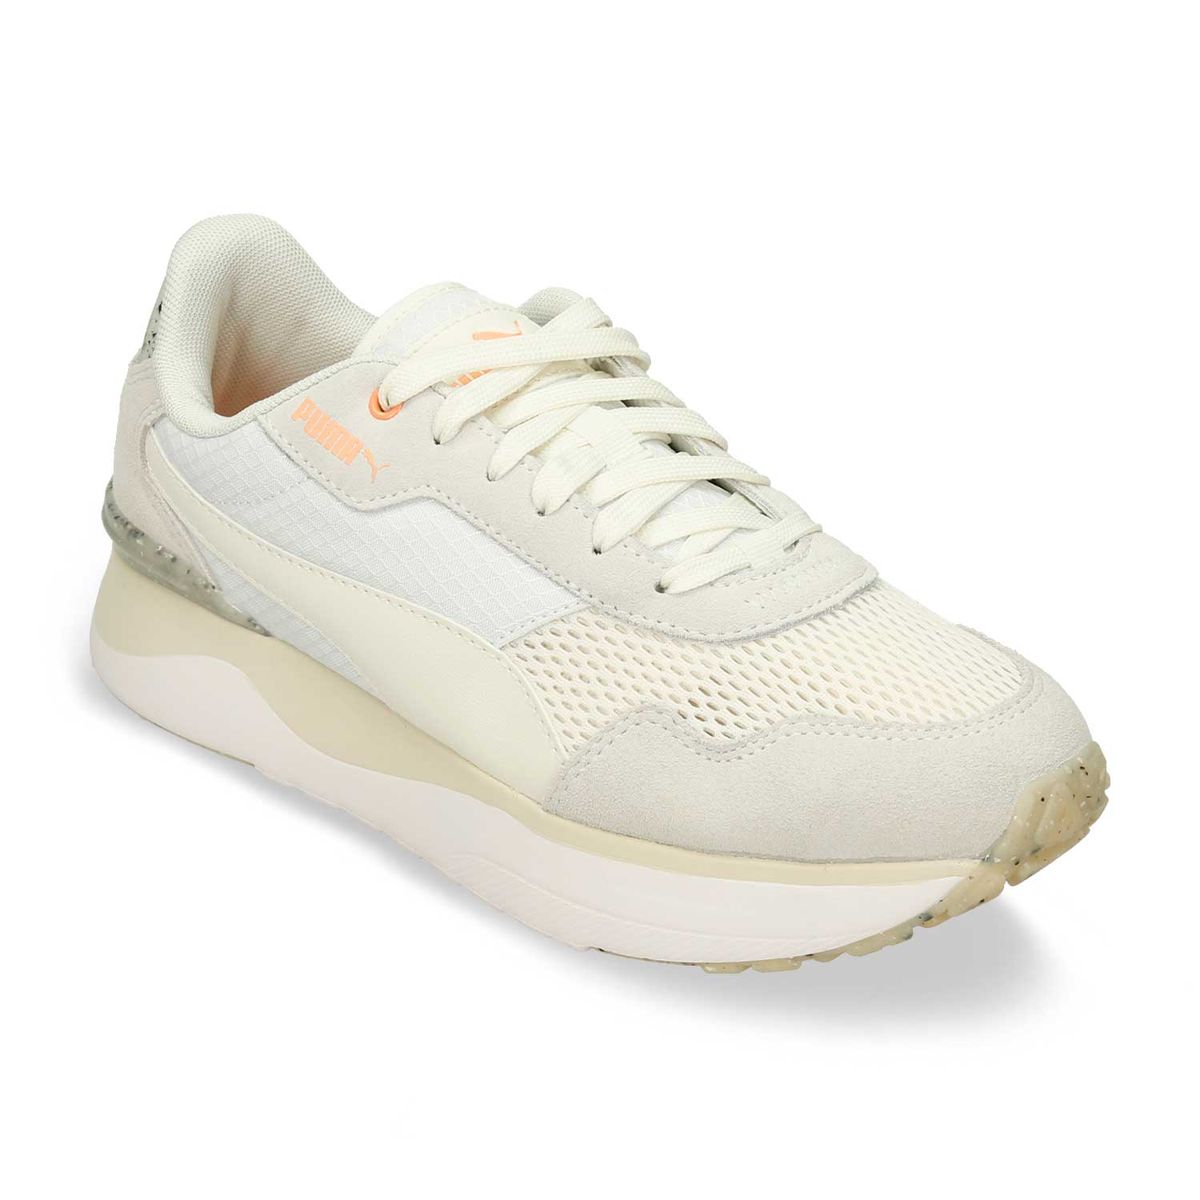 Tenis Deportivos Gris Puma R78 Voyage Better Wns Mujer